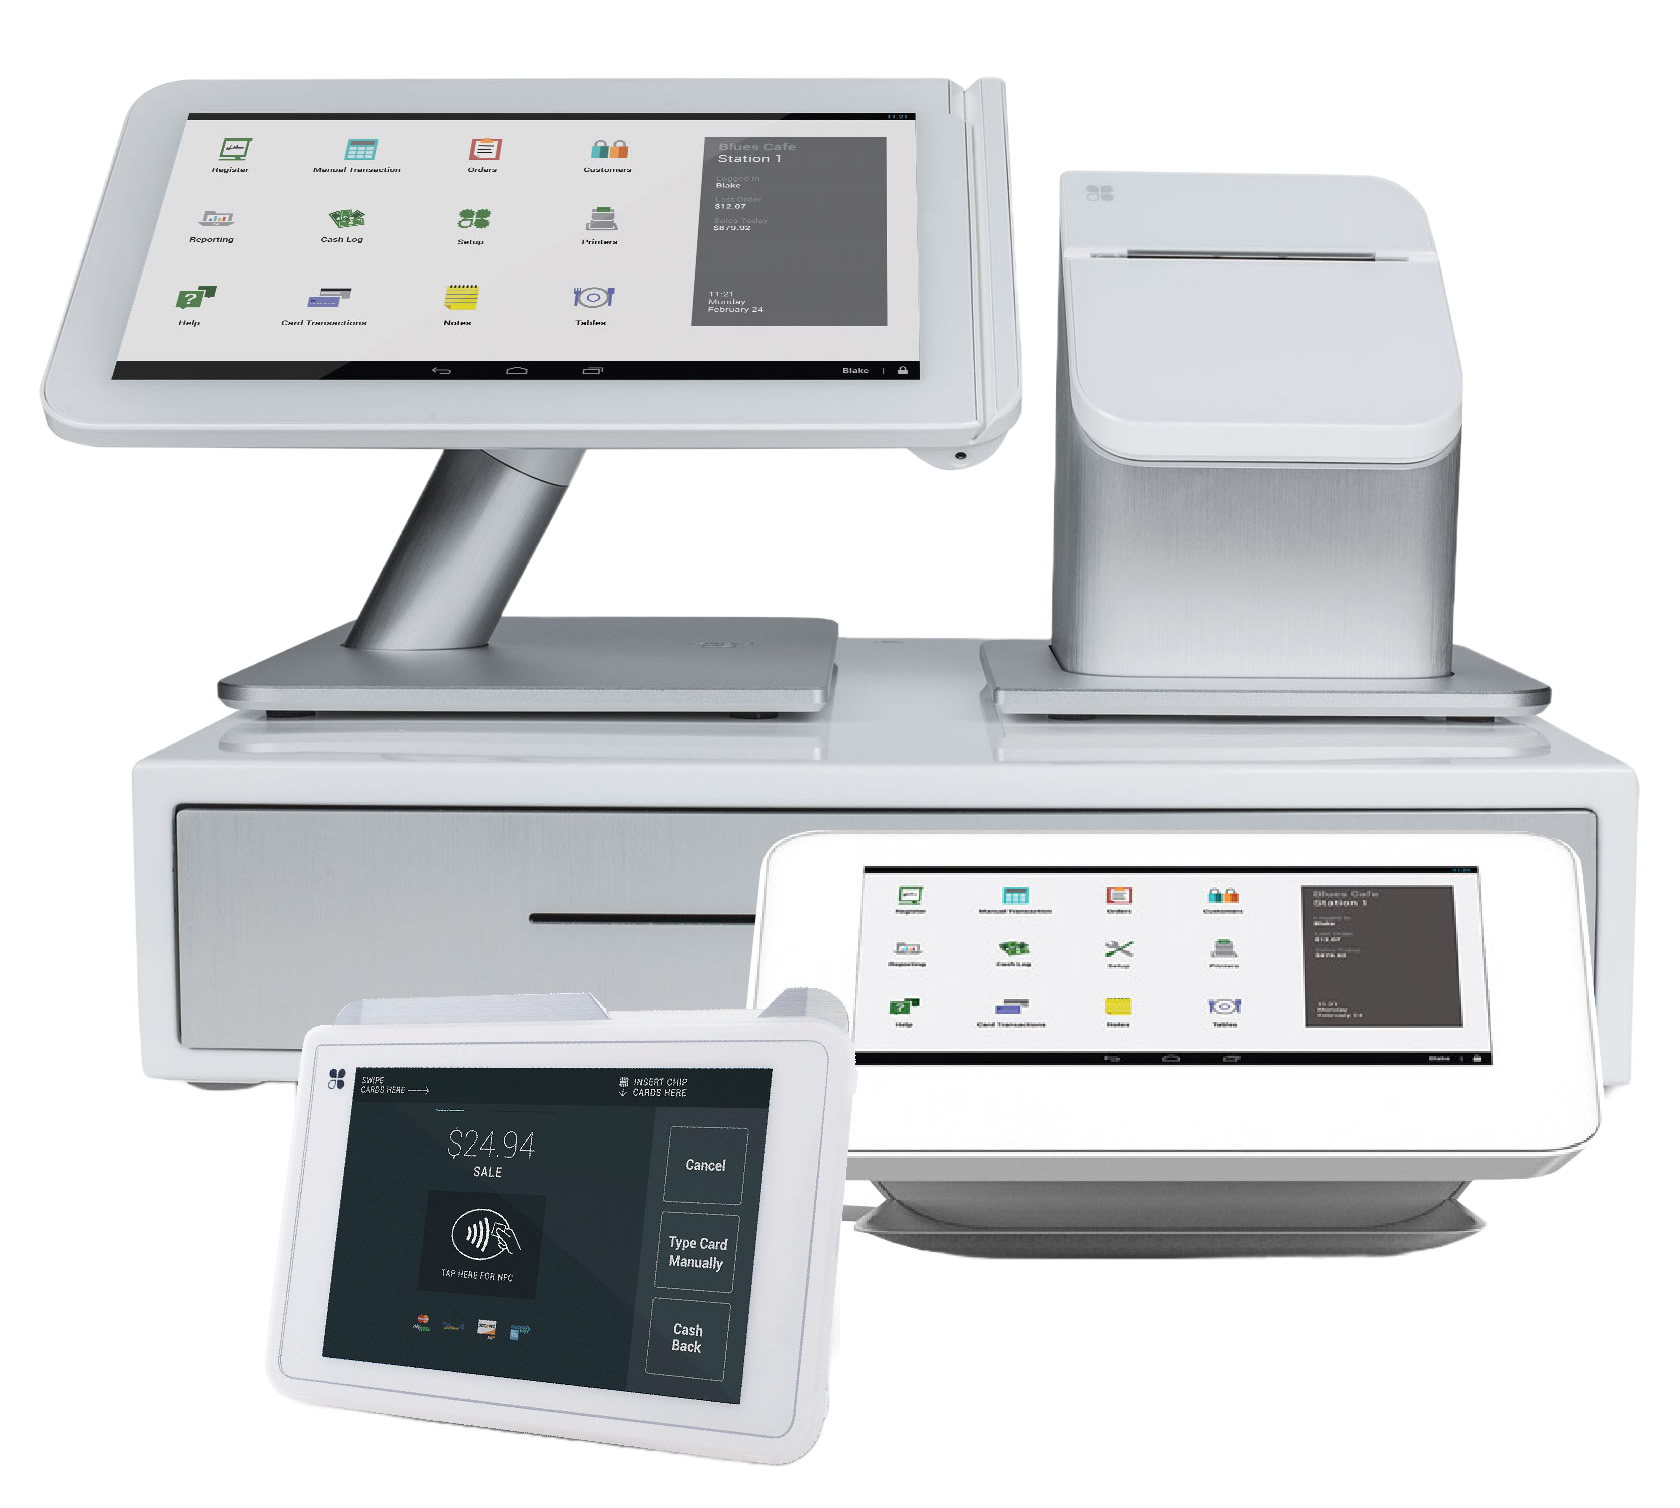 The Clover family of POS systems. Includes the Station Duo and the Mini.